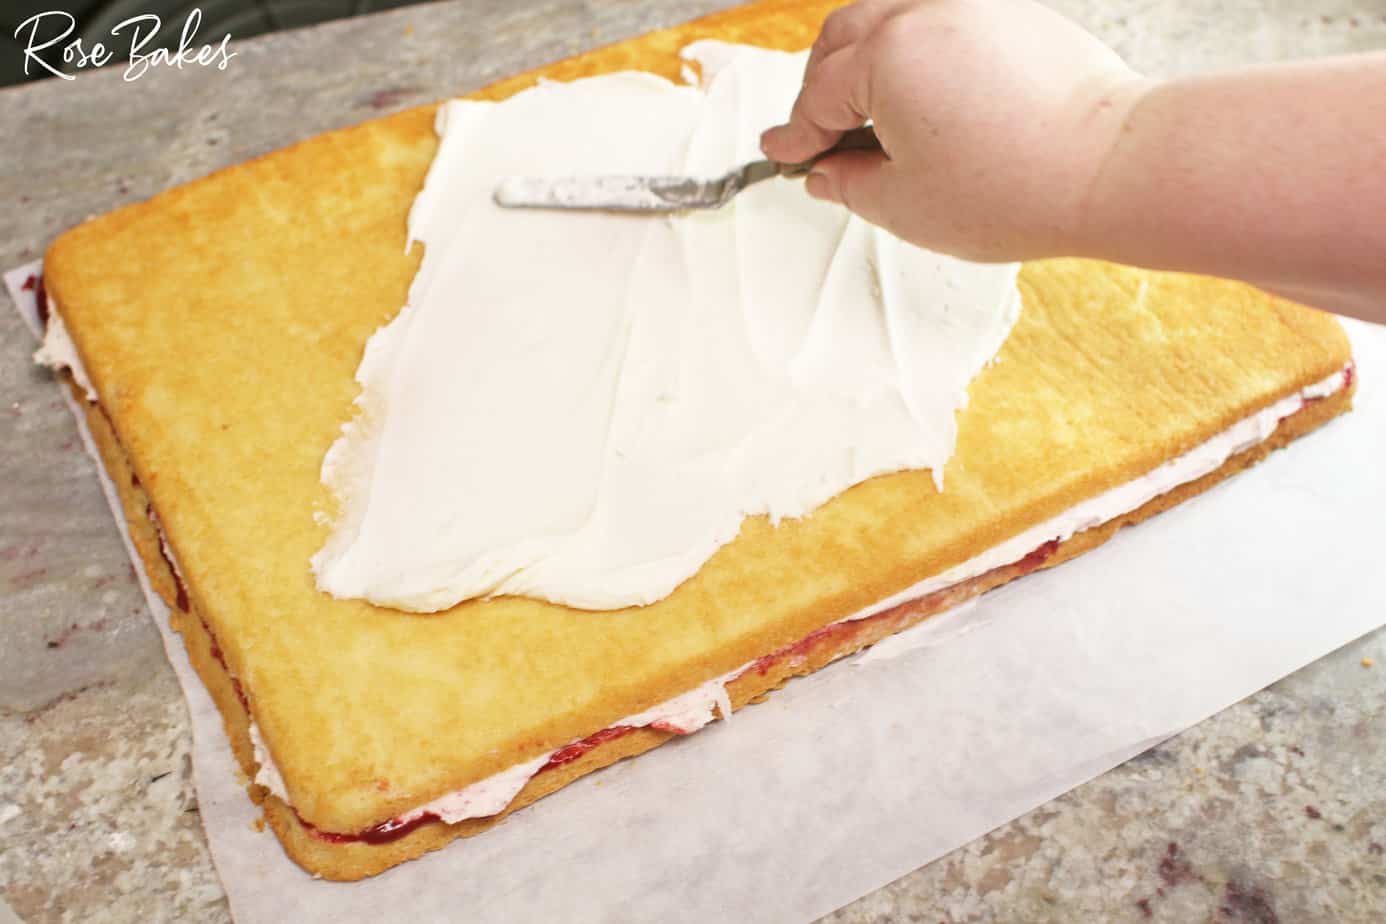 Frosting being added to the top cake layer